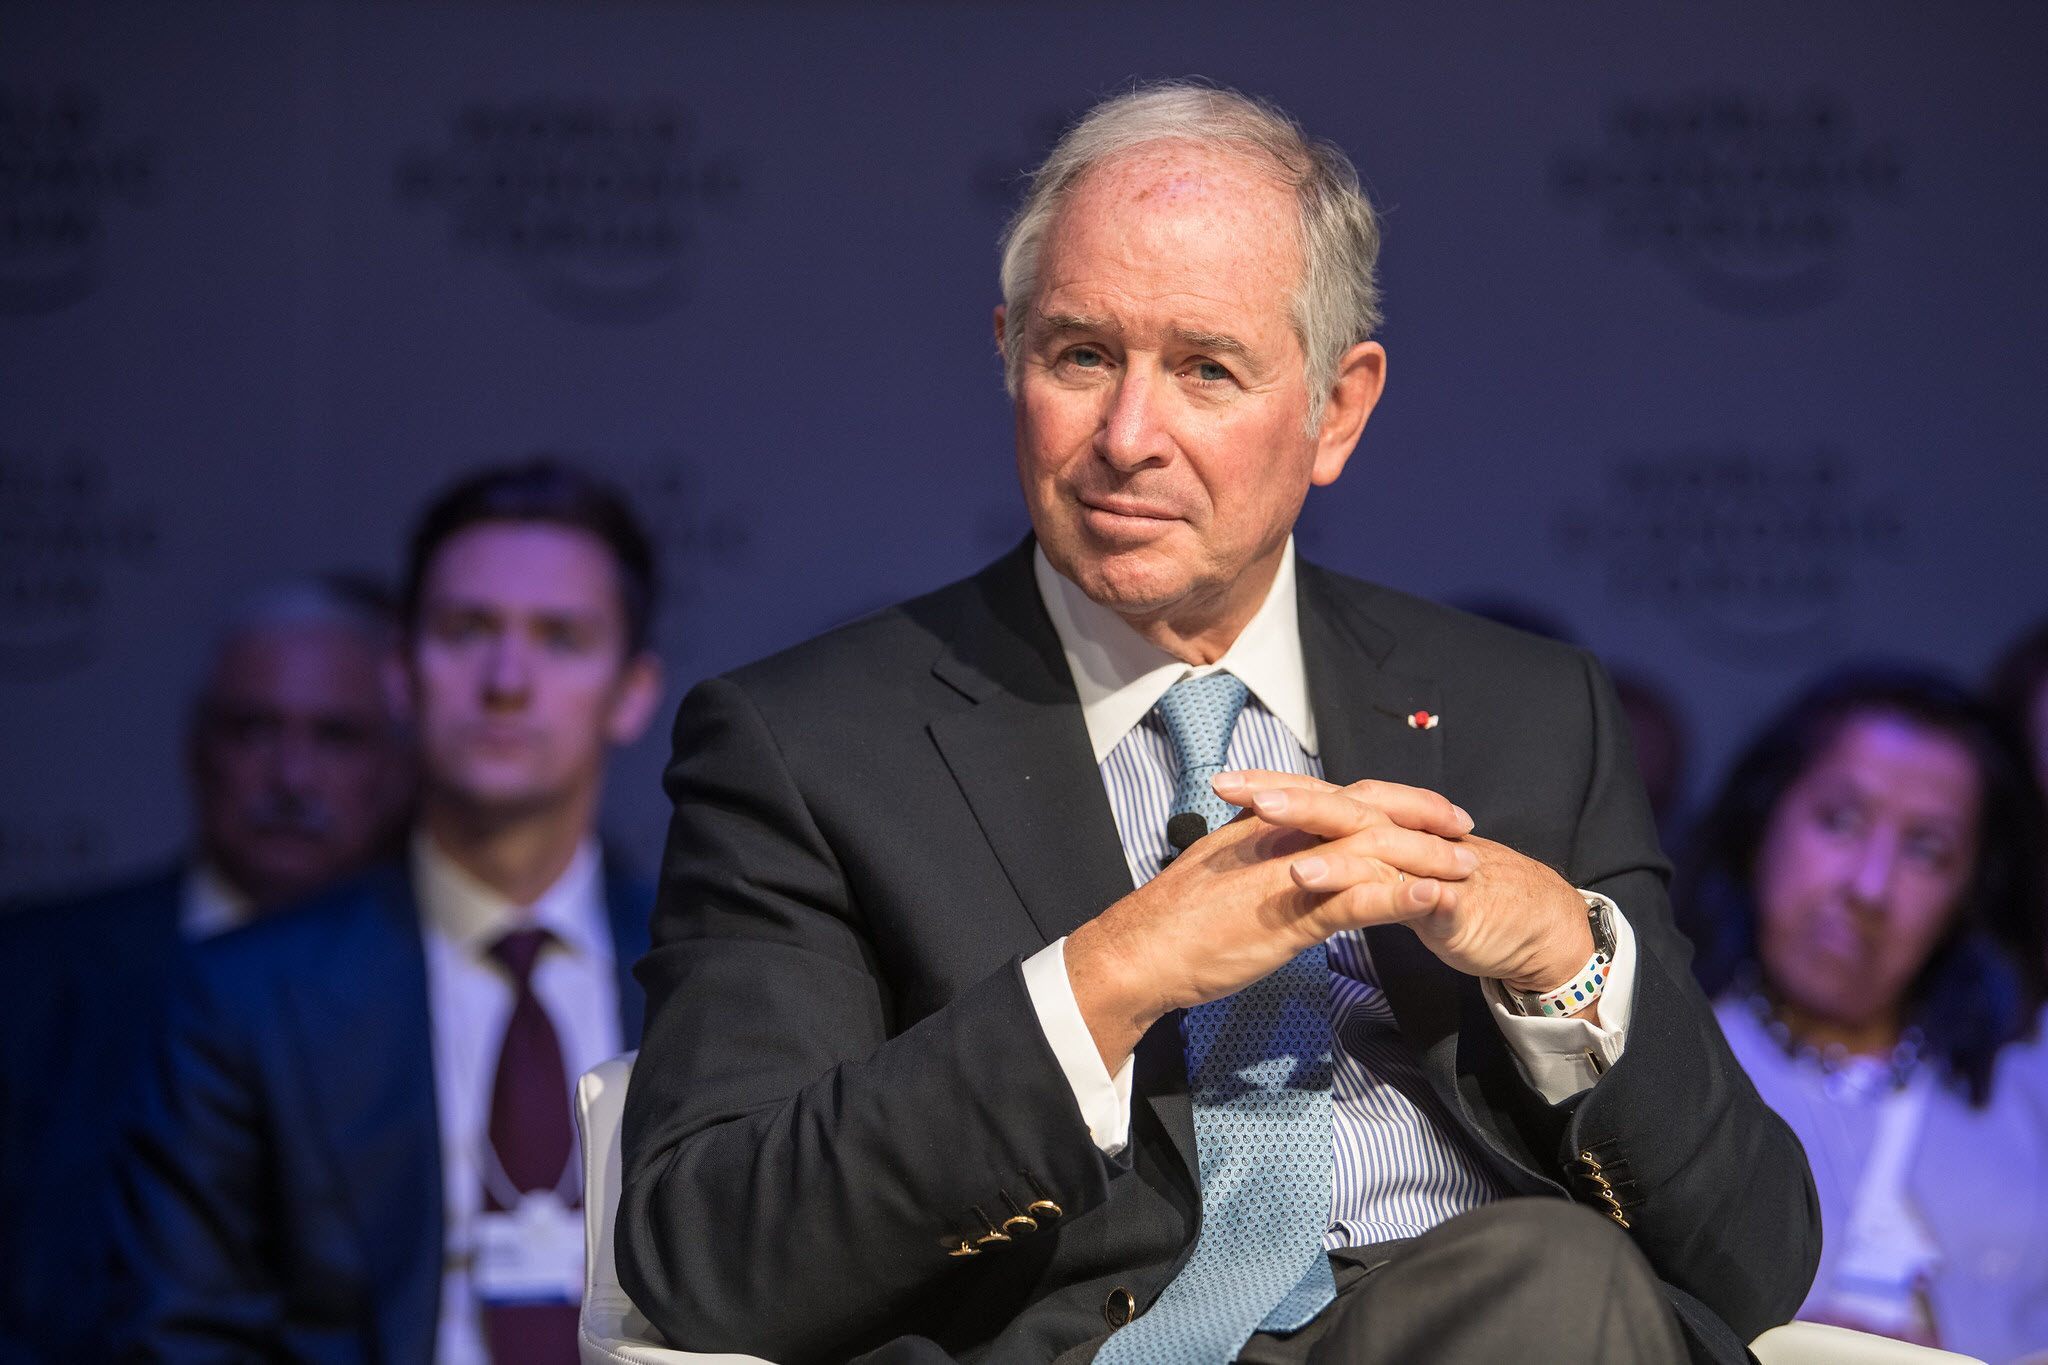 U.S. INVESTMENT GIANT BLACKSTONE’S EXPANSION INTO CANADIAN REAL ESTATE RAISES CONCERNS